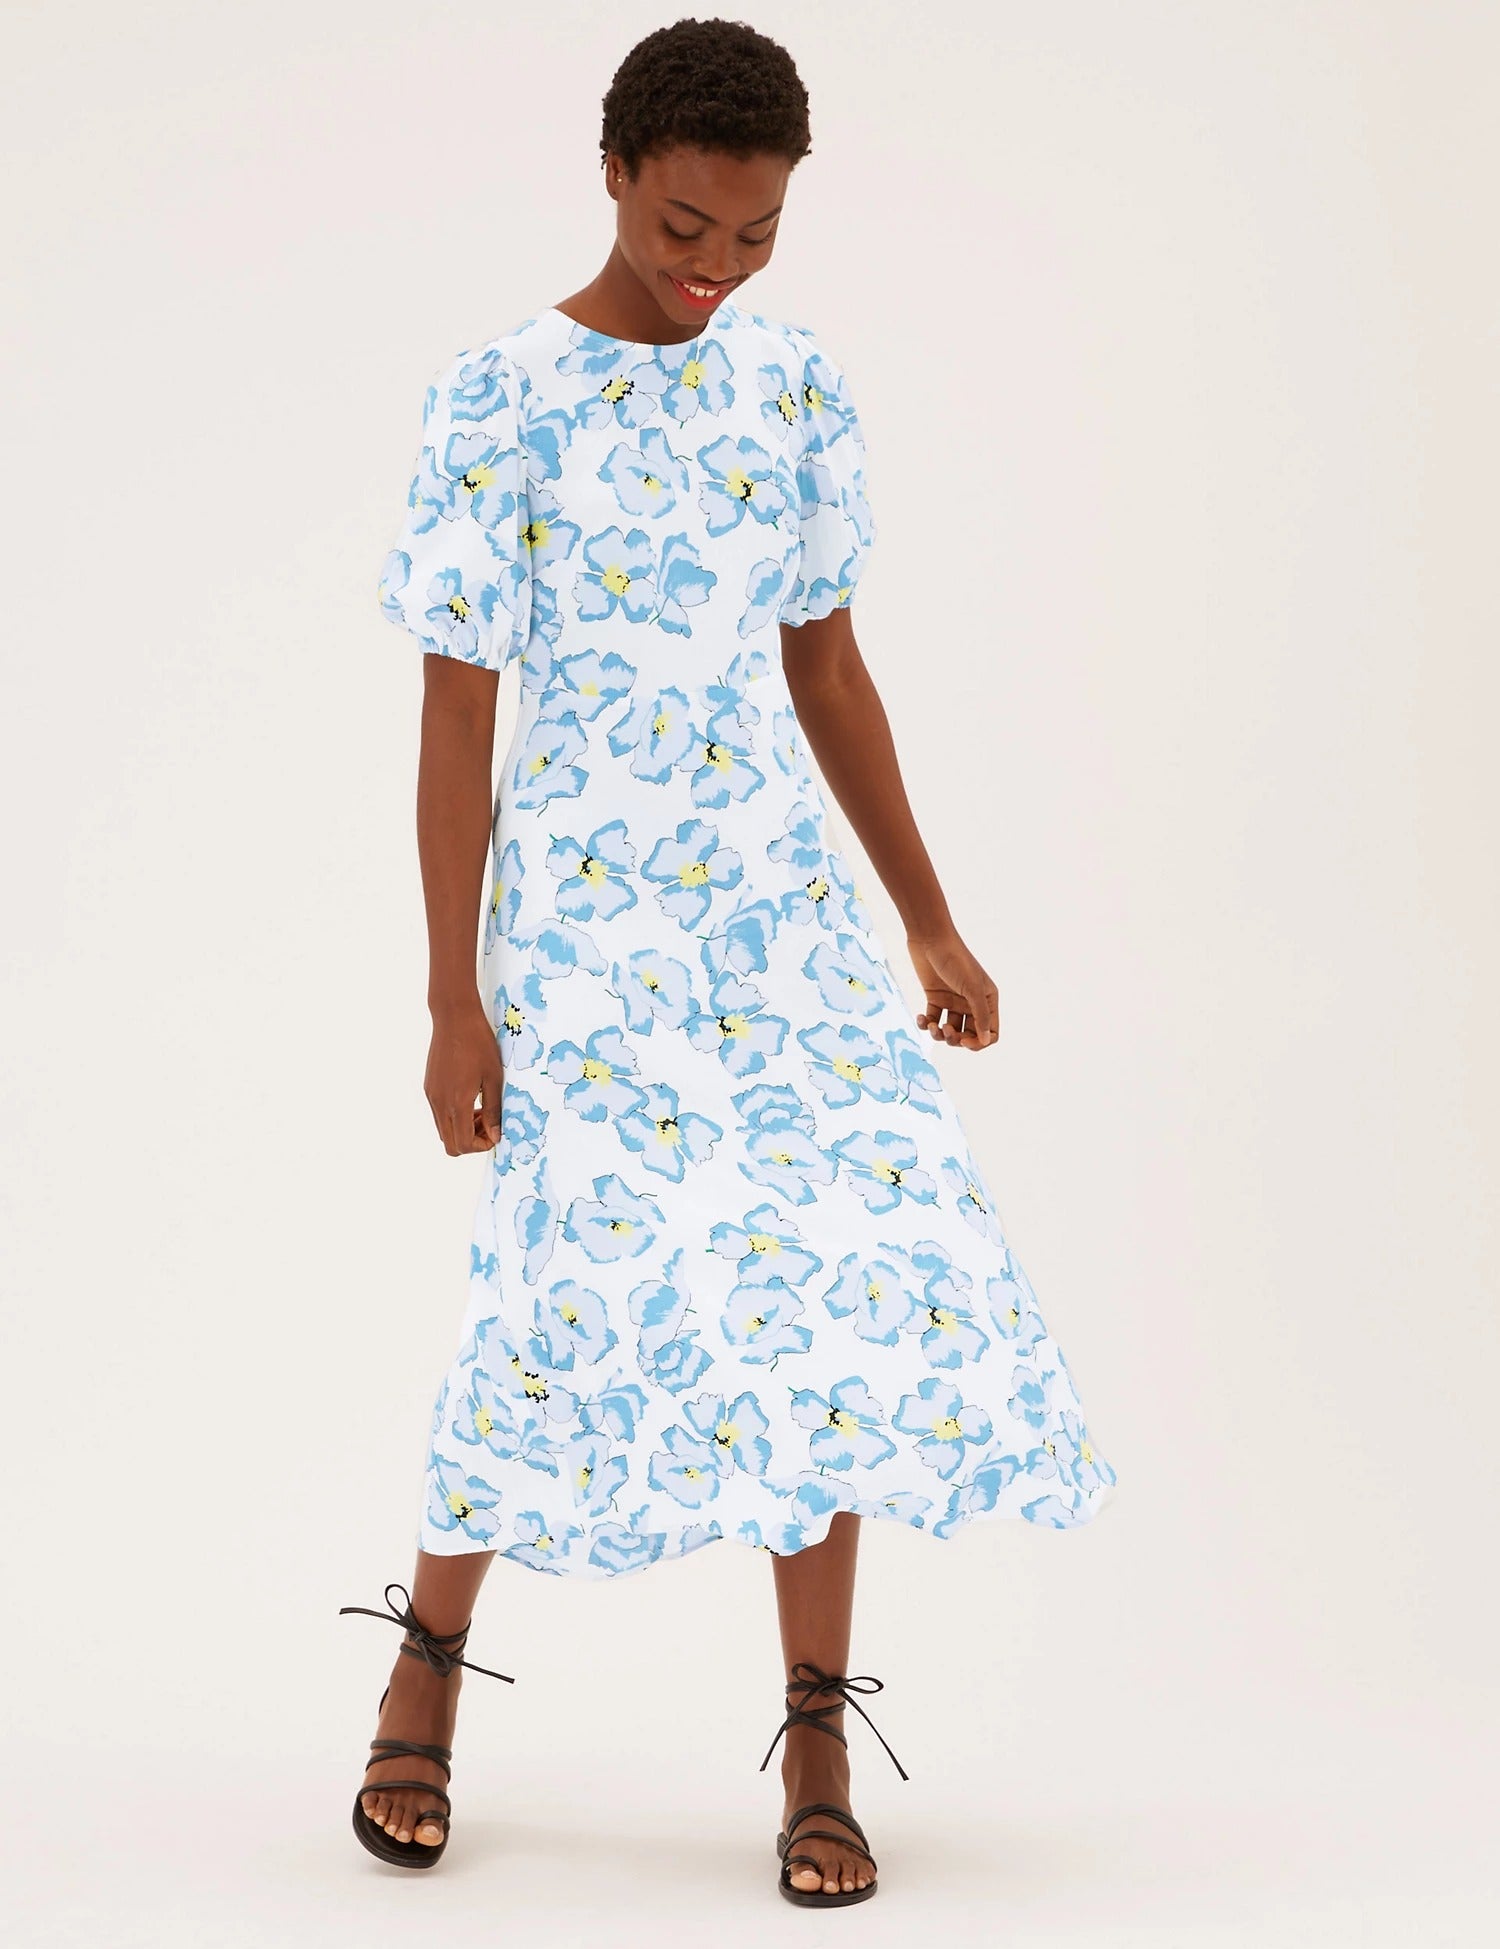 M&S Ivory & Blue Floral Round Neck Midaxi Tea Dress product image